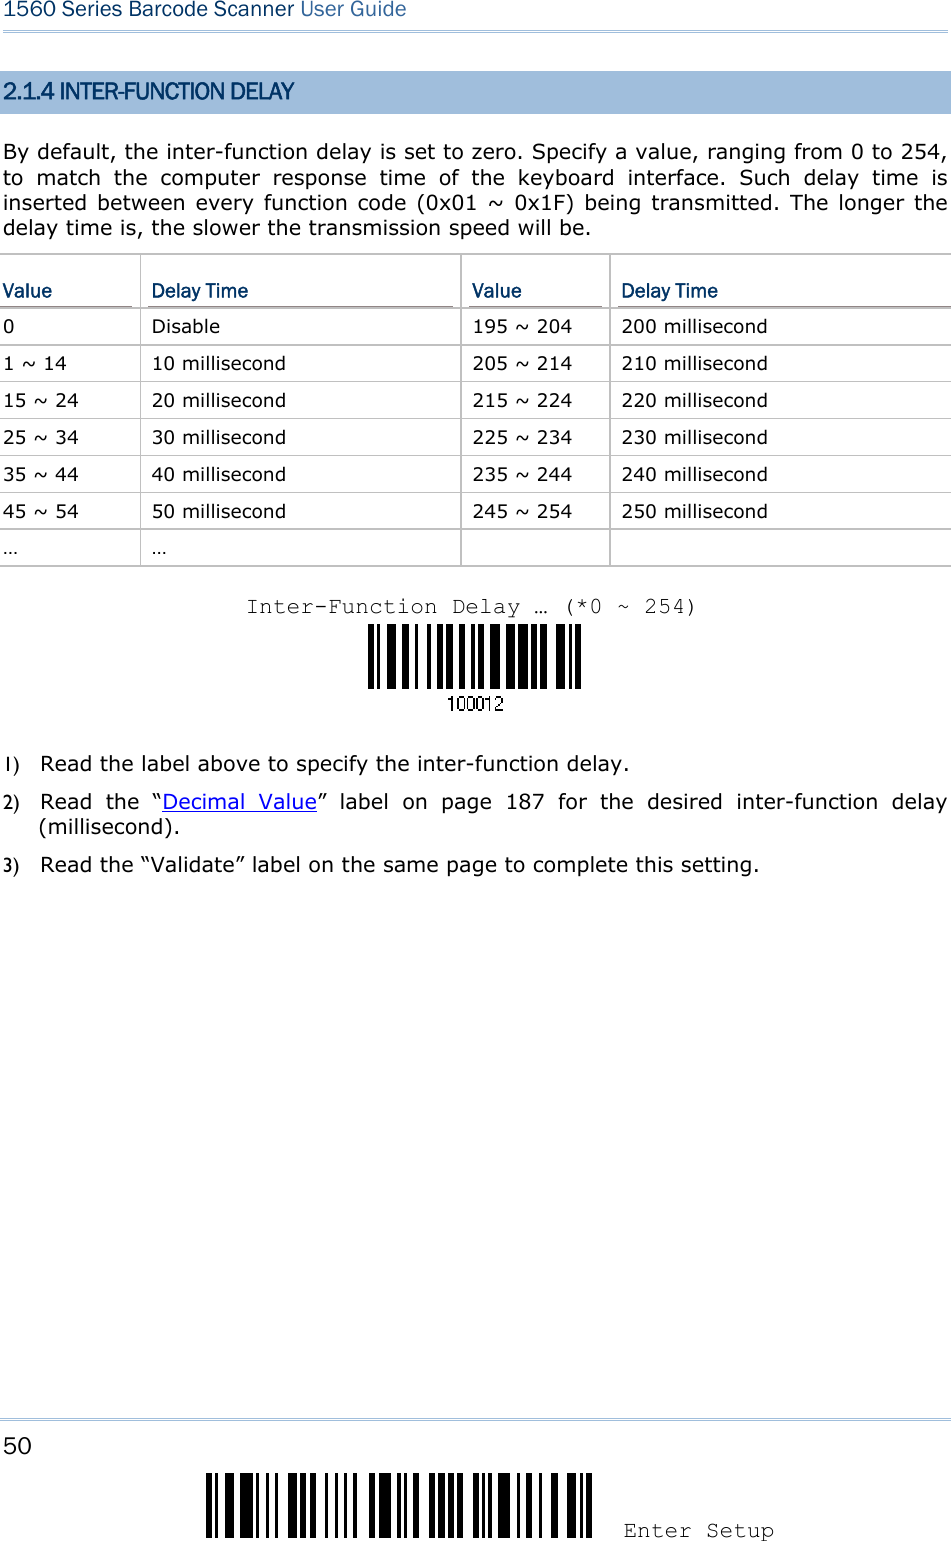 50 Enter Setup 1560 Series Barcode Scanner User Guide  2.1.4 INTER-FUNCTION DELAY By default, the inter-function delay is set to zero. Specify a value, ranging from 0 to 254, to match the computer response time of the keyboard interface. Such delay time is inserted between every function code (0x01 ~ 0x1F) being transmitted. The longer the delay time is, the slower the transmission speed will be. Value  Delay Time  Value  Delay Time 0  Disable  195 ~ 204  200 millisecond 1 ~ 14  10 millisecond  205 ~ 214  210 millisecond 15 ~ 24  20 millisecond  215 ~ 224  220 millisecond 25 ~ 34  30 millisecond  225 ~ 234  230 millisecond 35 ~ 44  40 millisecond  235 ~ 244  240 millisecond 45 ~ 54  50 millisecond  245 ~ 254  250 millisecond … …        1) Read the label above to specify the inter-function delay.       2) Read the “Decimal Value” label on page 187 for the desired inter-function delay (millisecond).  3) Read the “Validate” label on the same page to complete this setting.    Inter-Function Delay … (*0 ~ 254)